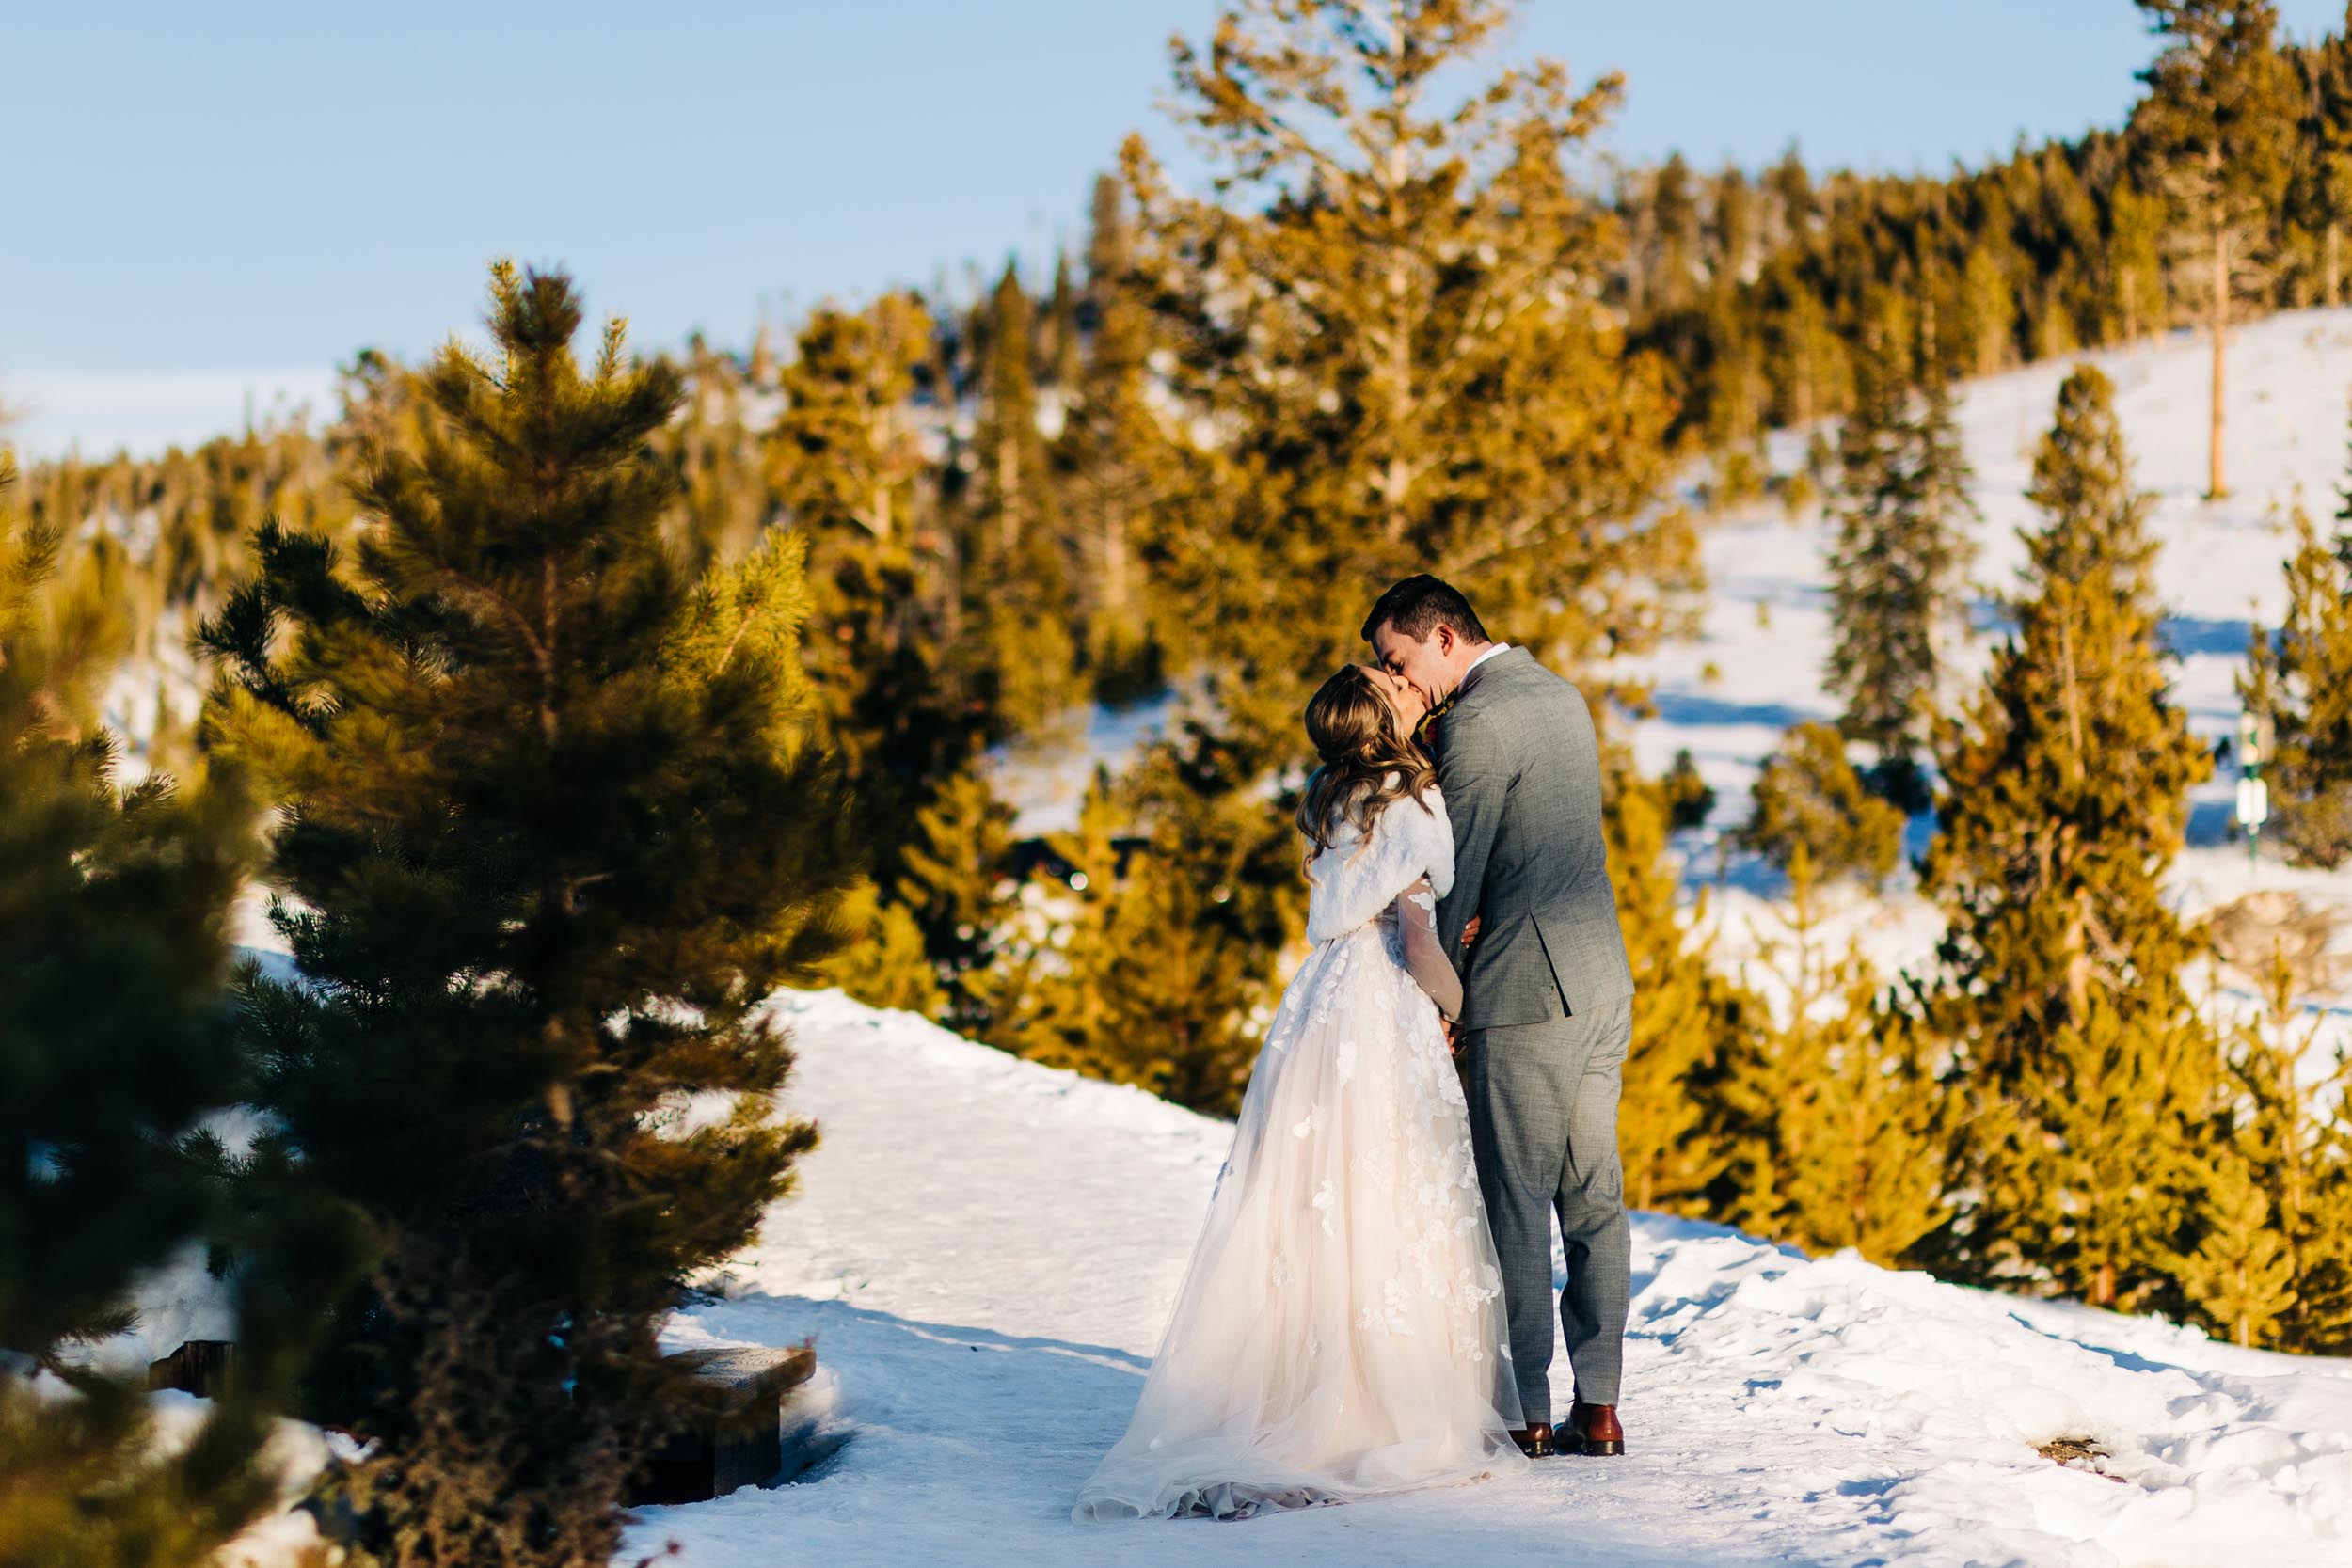 sunset wedding photo at sapphire point in colorado